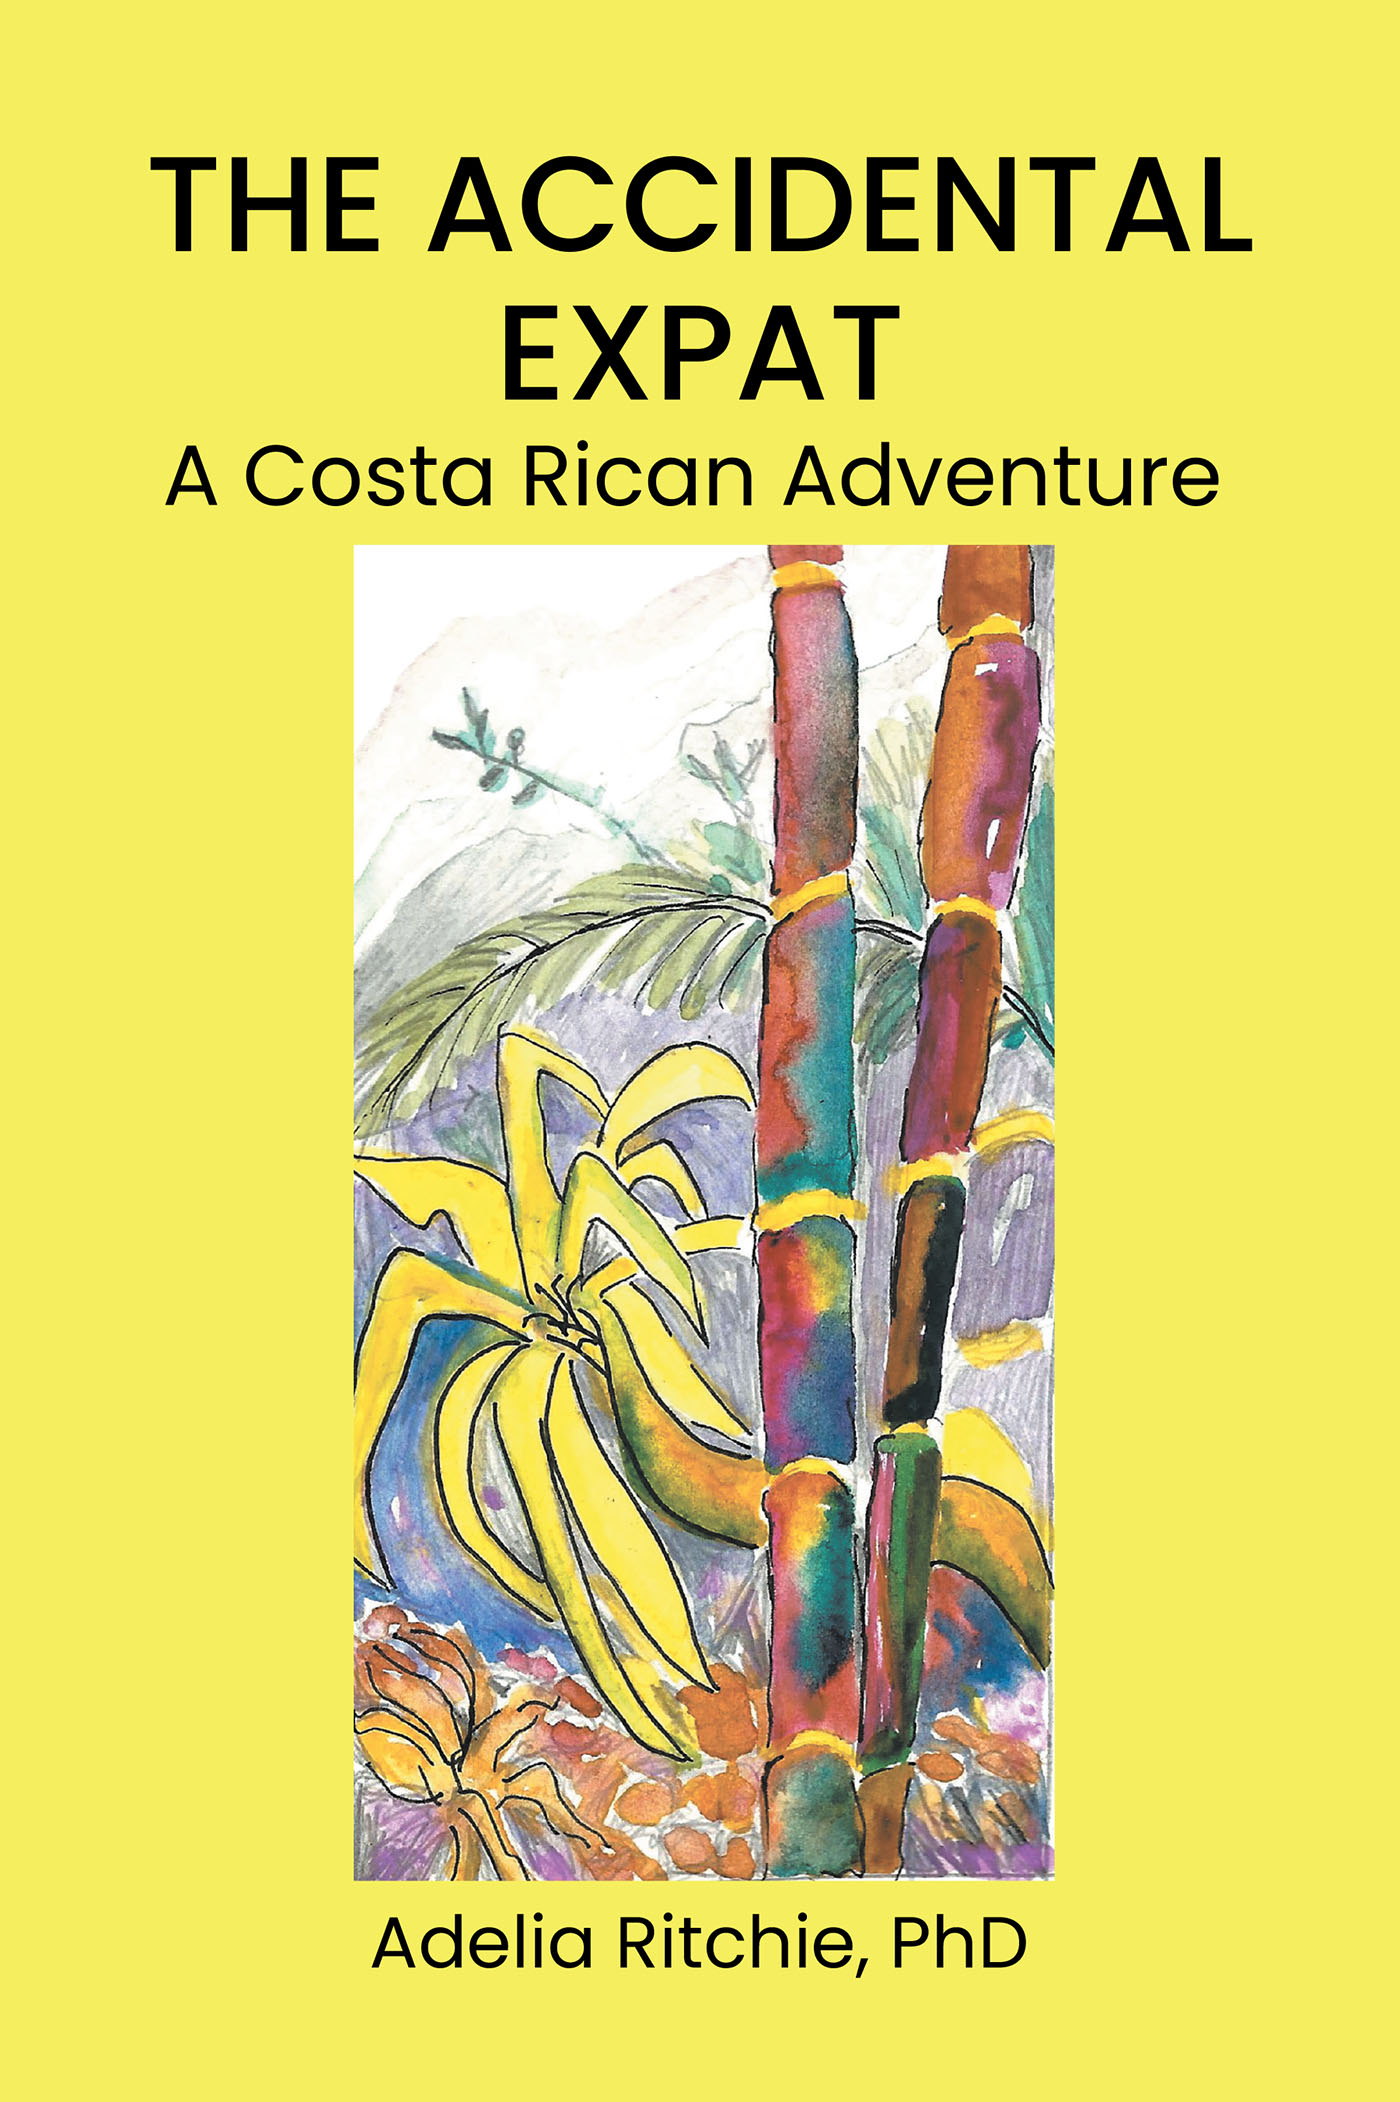 Author Adelia Ritchie’s New Book, “The Accidental Expat: A Costa Rican Adventure,” Follows the Author as She Moves from the Usa to Costa Rica, Alone and in Her Seventies